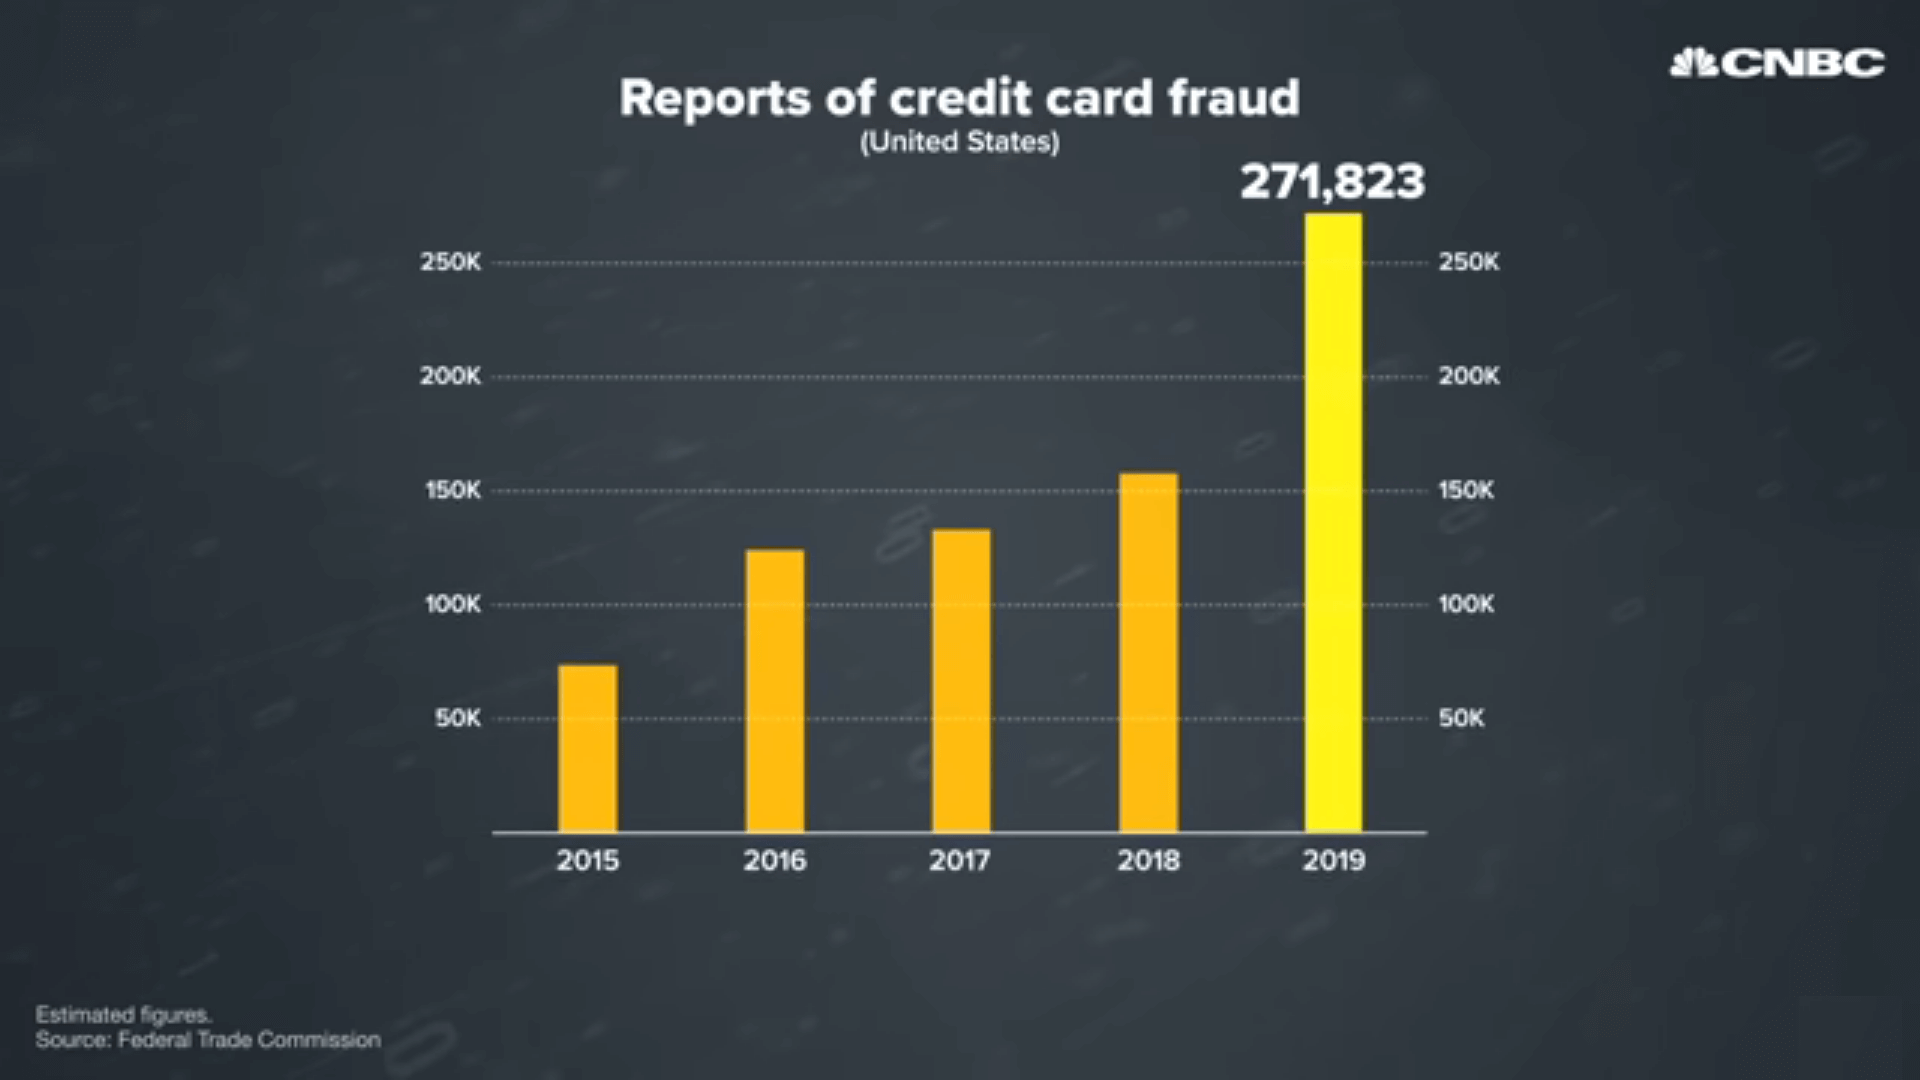 2019 Credit Card Fraud Cases in the US